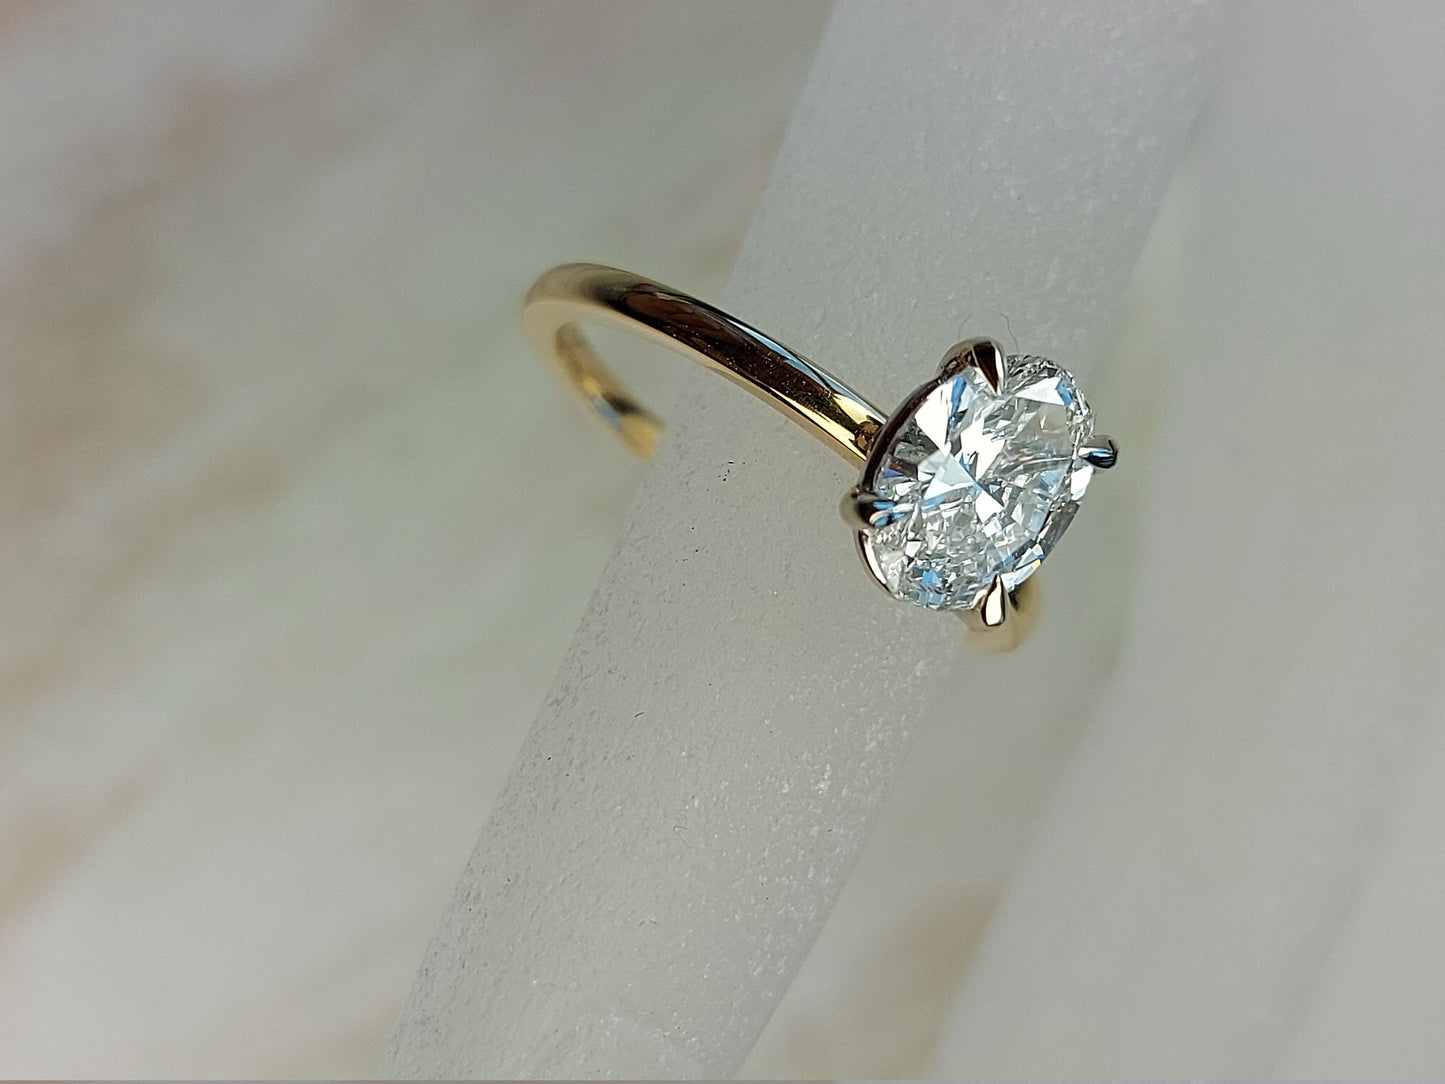 Lab grown Oval Cut solid gold diamond ring 1 Ct Modern Diamond Ring, Hailey Bieber ring Diamond Engagement Ring.